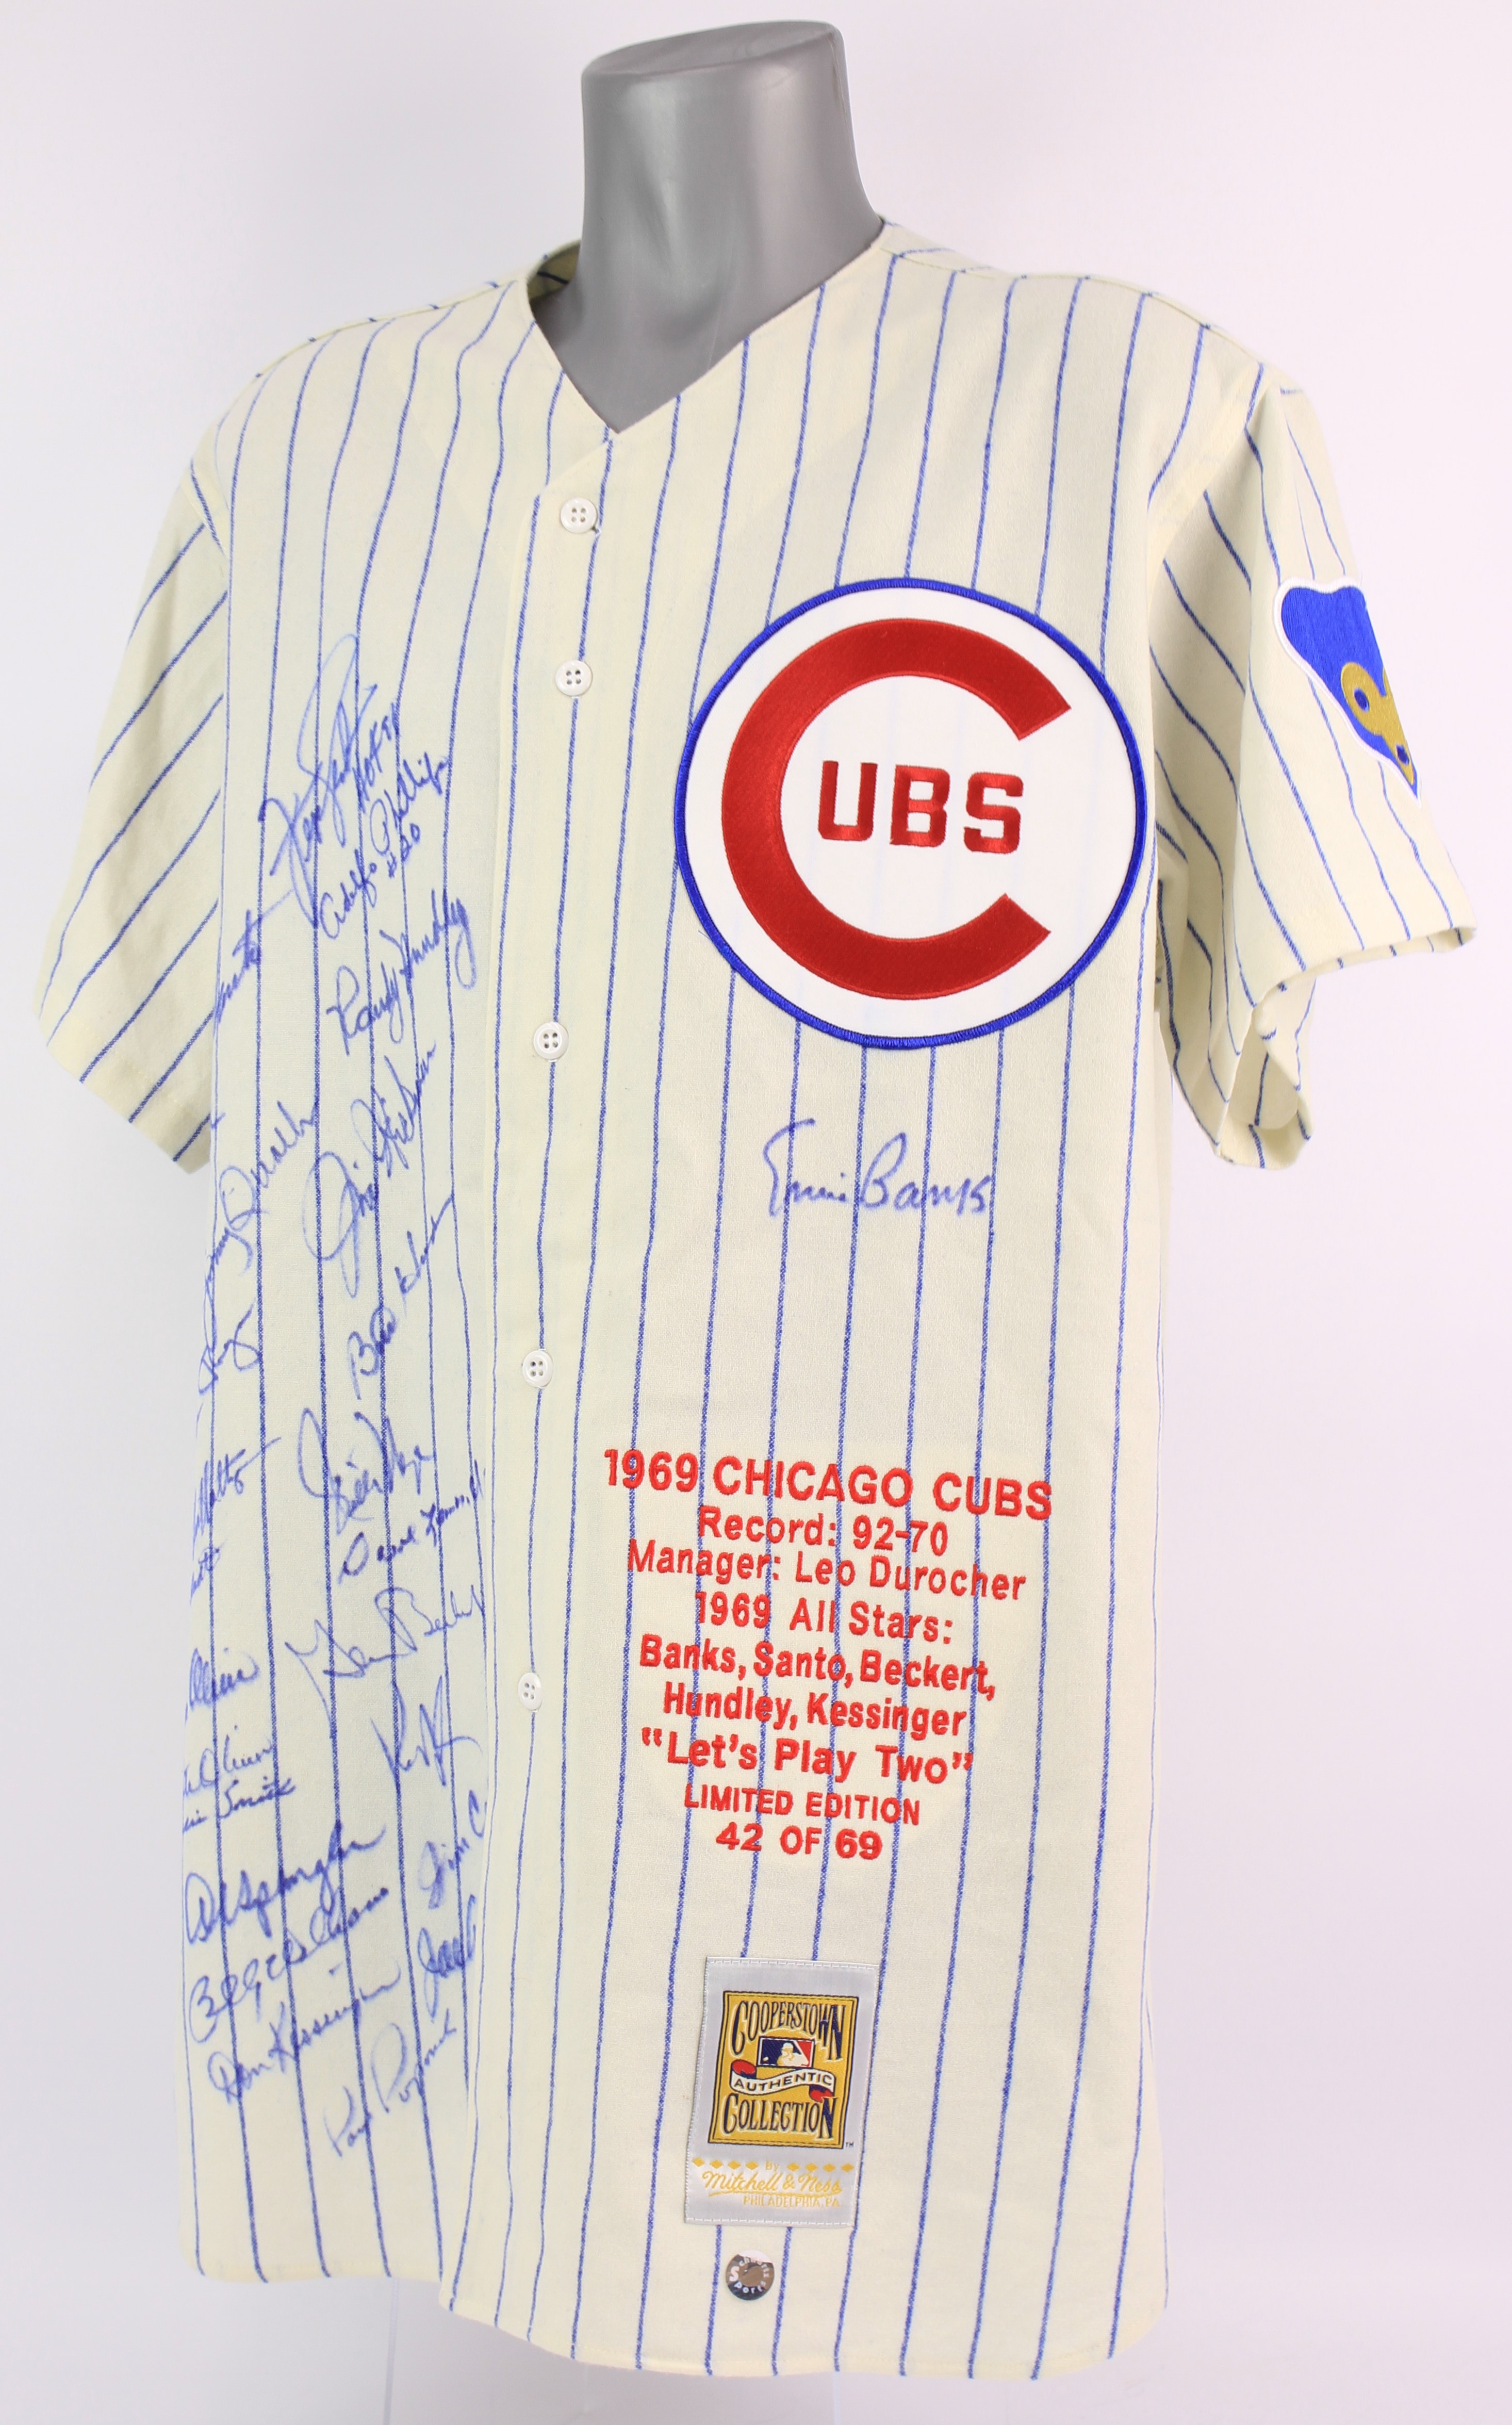 Chicago Cubs Ernie Banks 1969 Mitchell & Ness Authentic Home Jersey 56 = XXX-Large